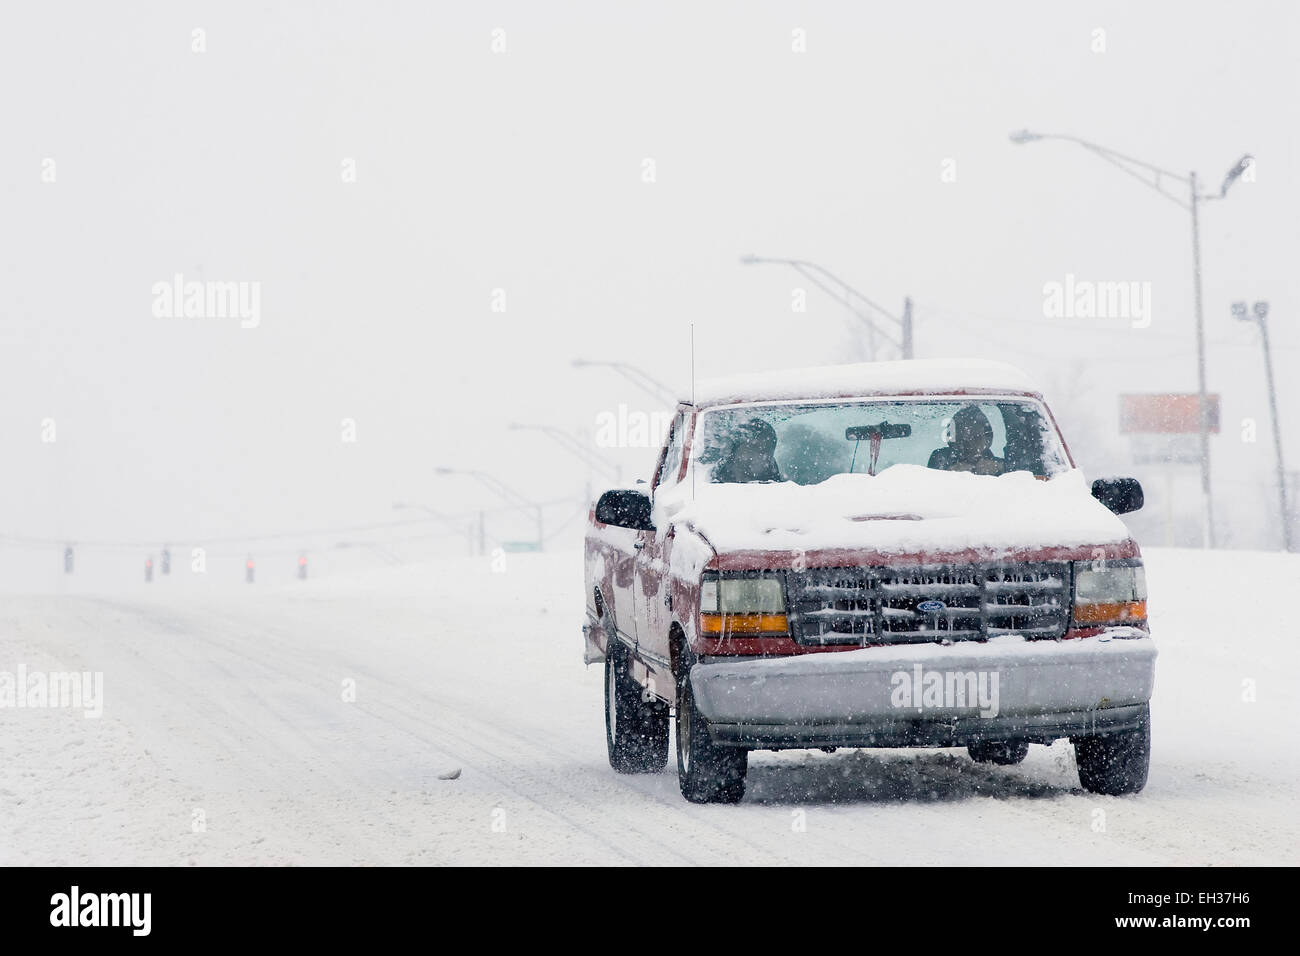 Lexington, Kentucky, USA. 05th Mar, 2015. A snow- and ice-covered Ford pickup truck traverses a whited-out New Circle Road, one of the city's main thoroughfares, as snow falls on Thursday, March 5, 2015 in Lexington, KY, USA. The governor declared a statewide emergency for the second time in 17 days after a winter storm dumped up to 21 inches of snow on the state in less than 17 hours, including a new record of 17.1 inches in Lexington, Kentucky's second-largest city. (Apex MediaWire Photo by Billy Suratt) Stock Photo